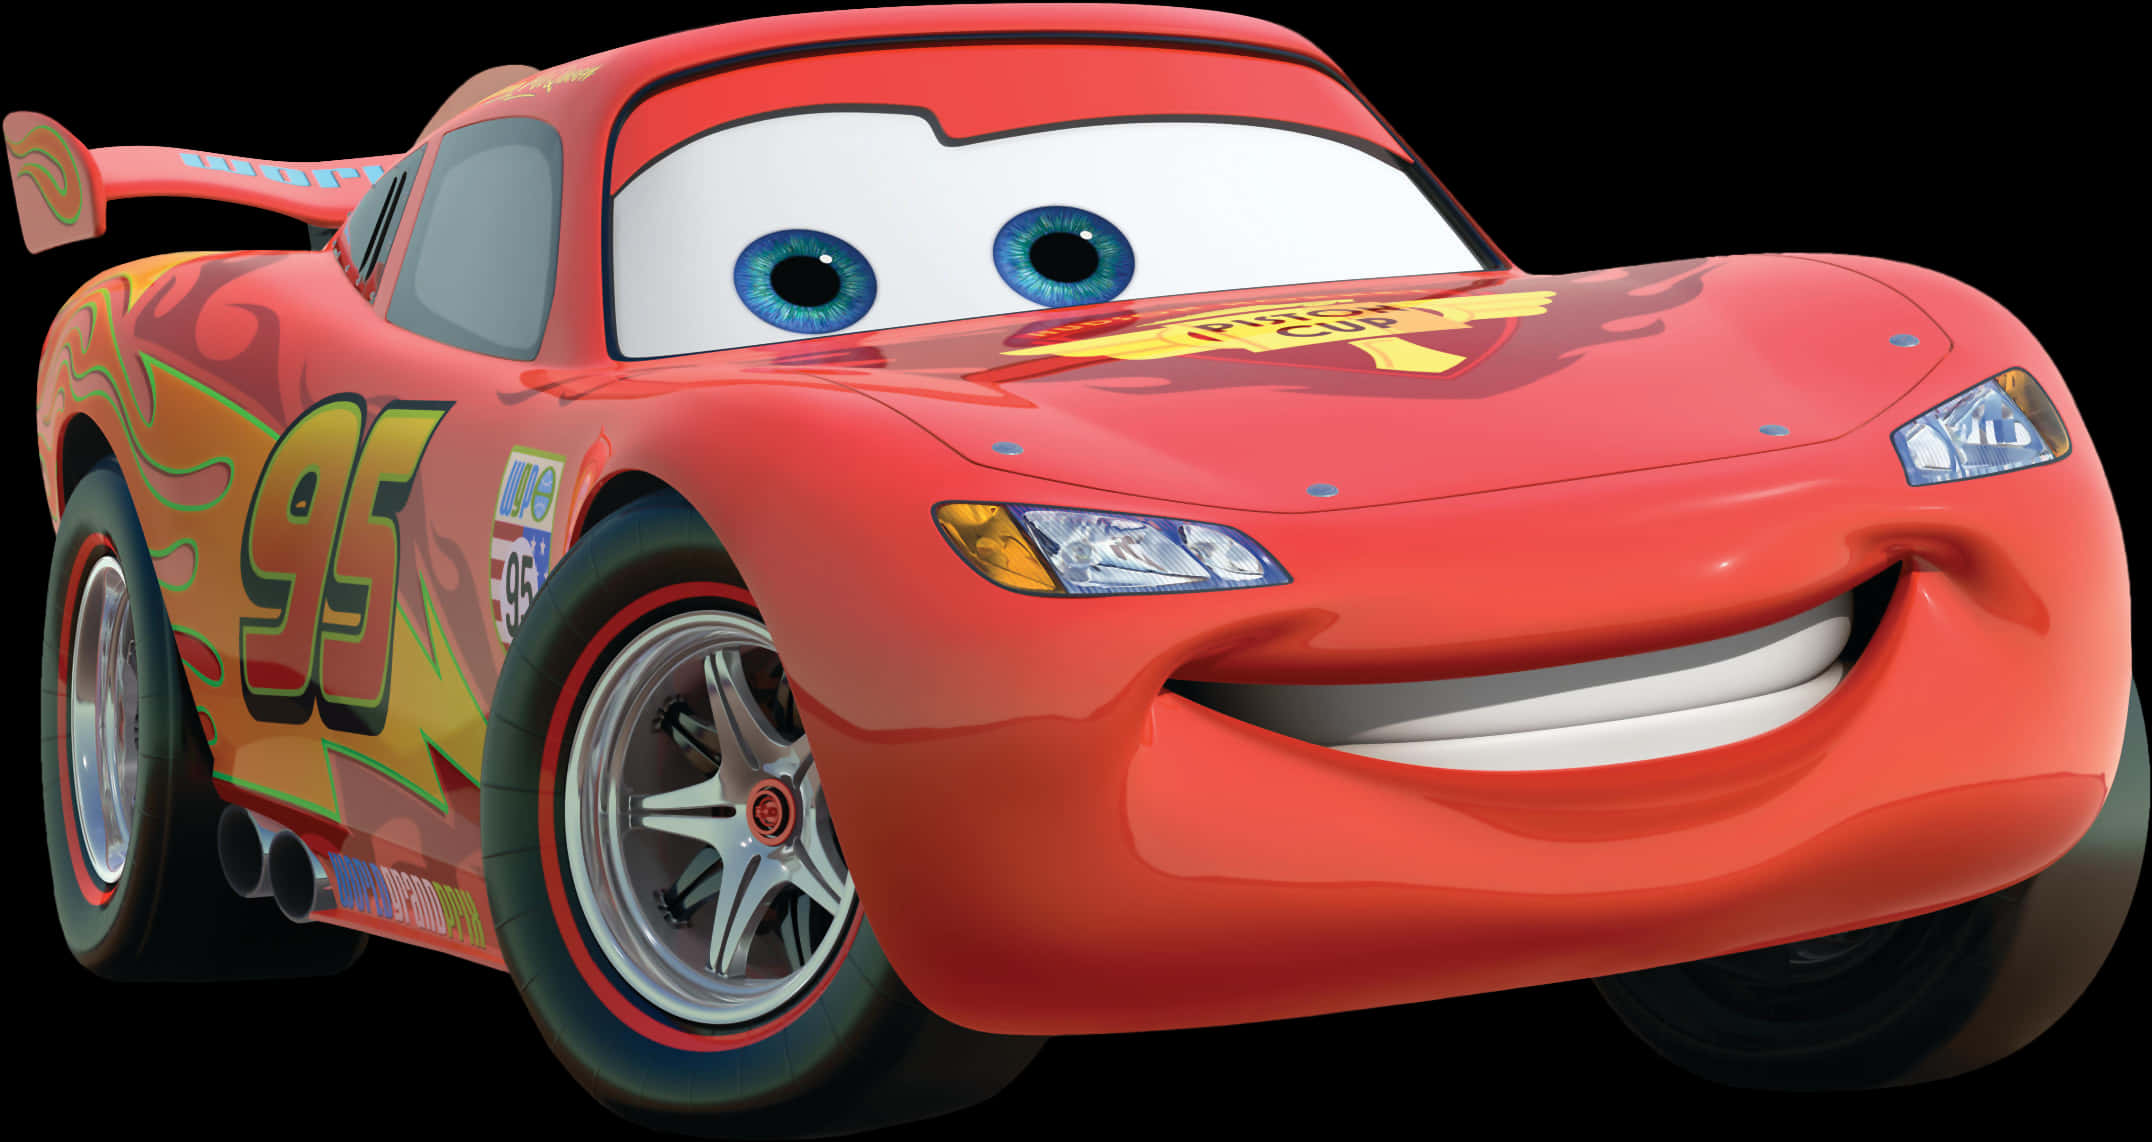 A Red Car With A Smiling Face